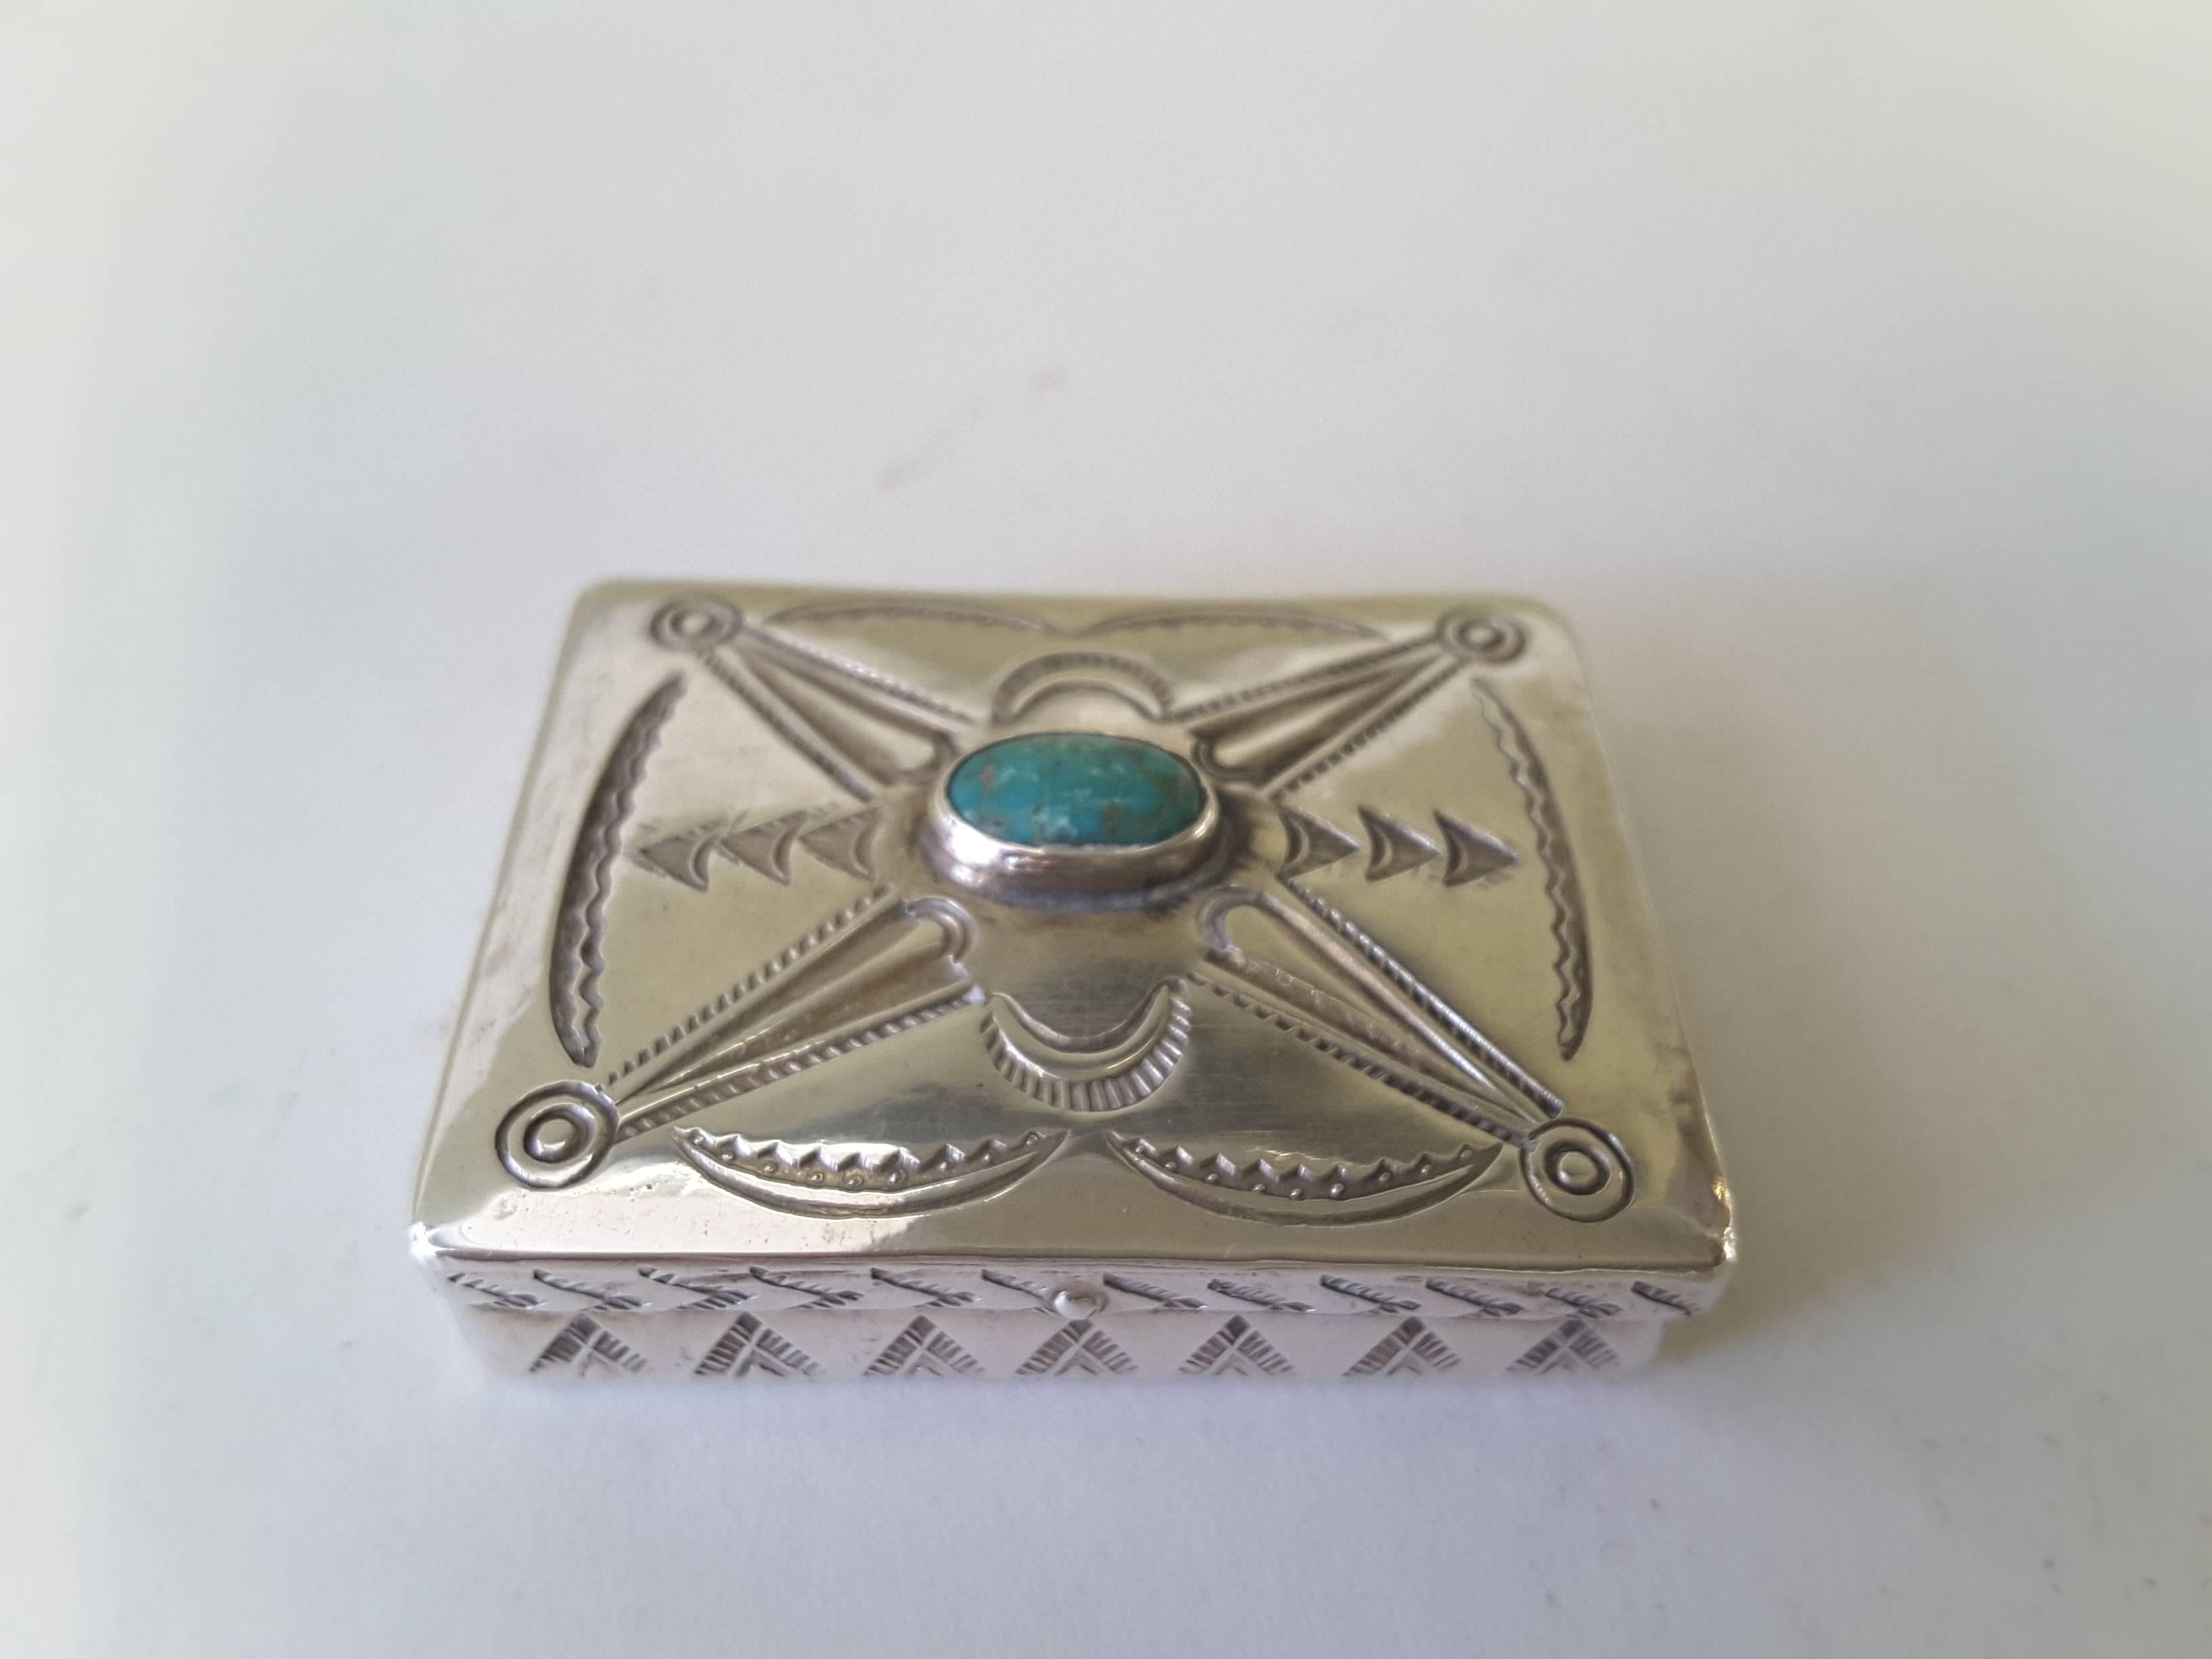 Miniature .925 Silver Navajo and turquoise trinket box, typical Navajo engraved design on five sides. The box has a turquoise stone mounted in the center on the lid. The box measures 1 5/8"-inches wide x 1 3/8"-inches deep x